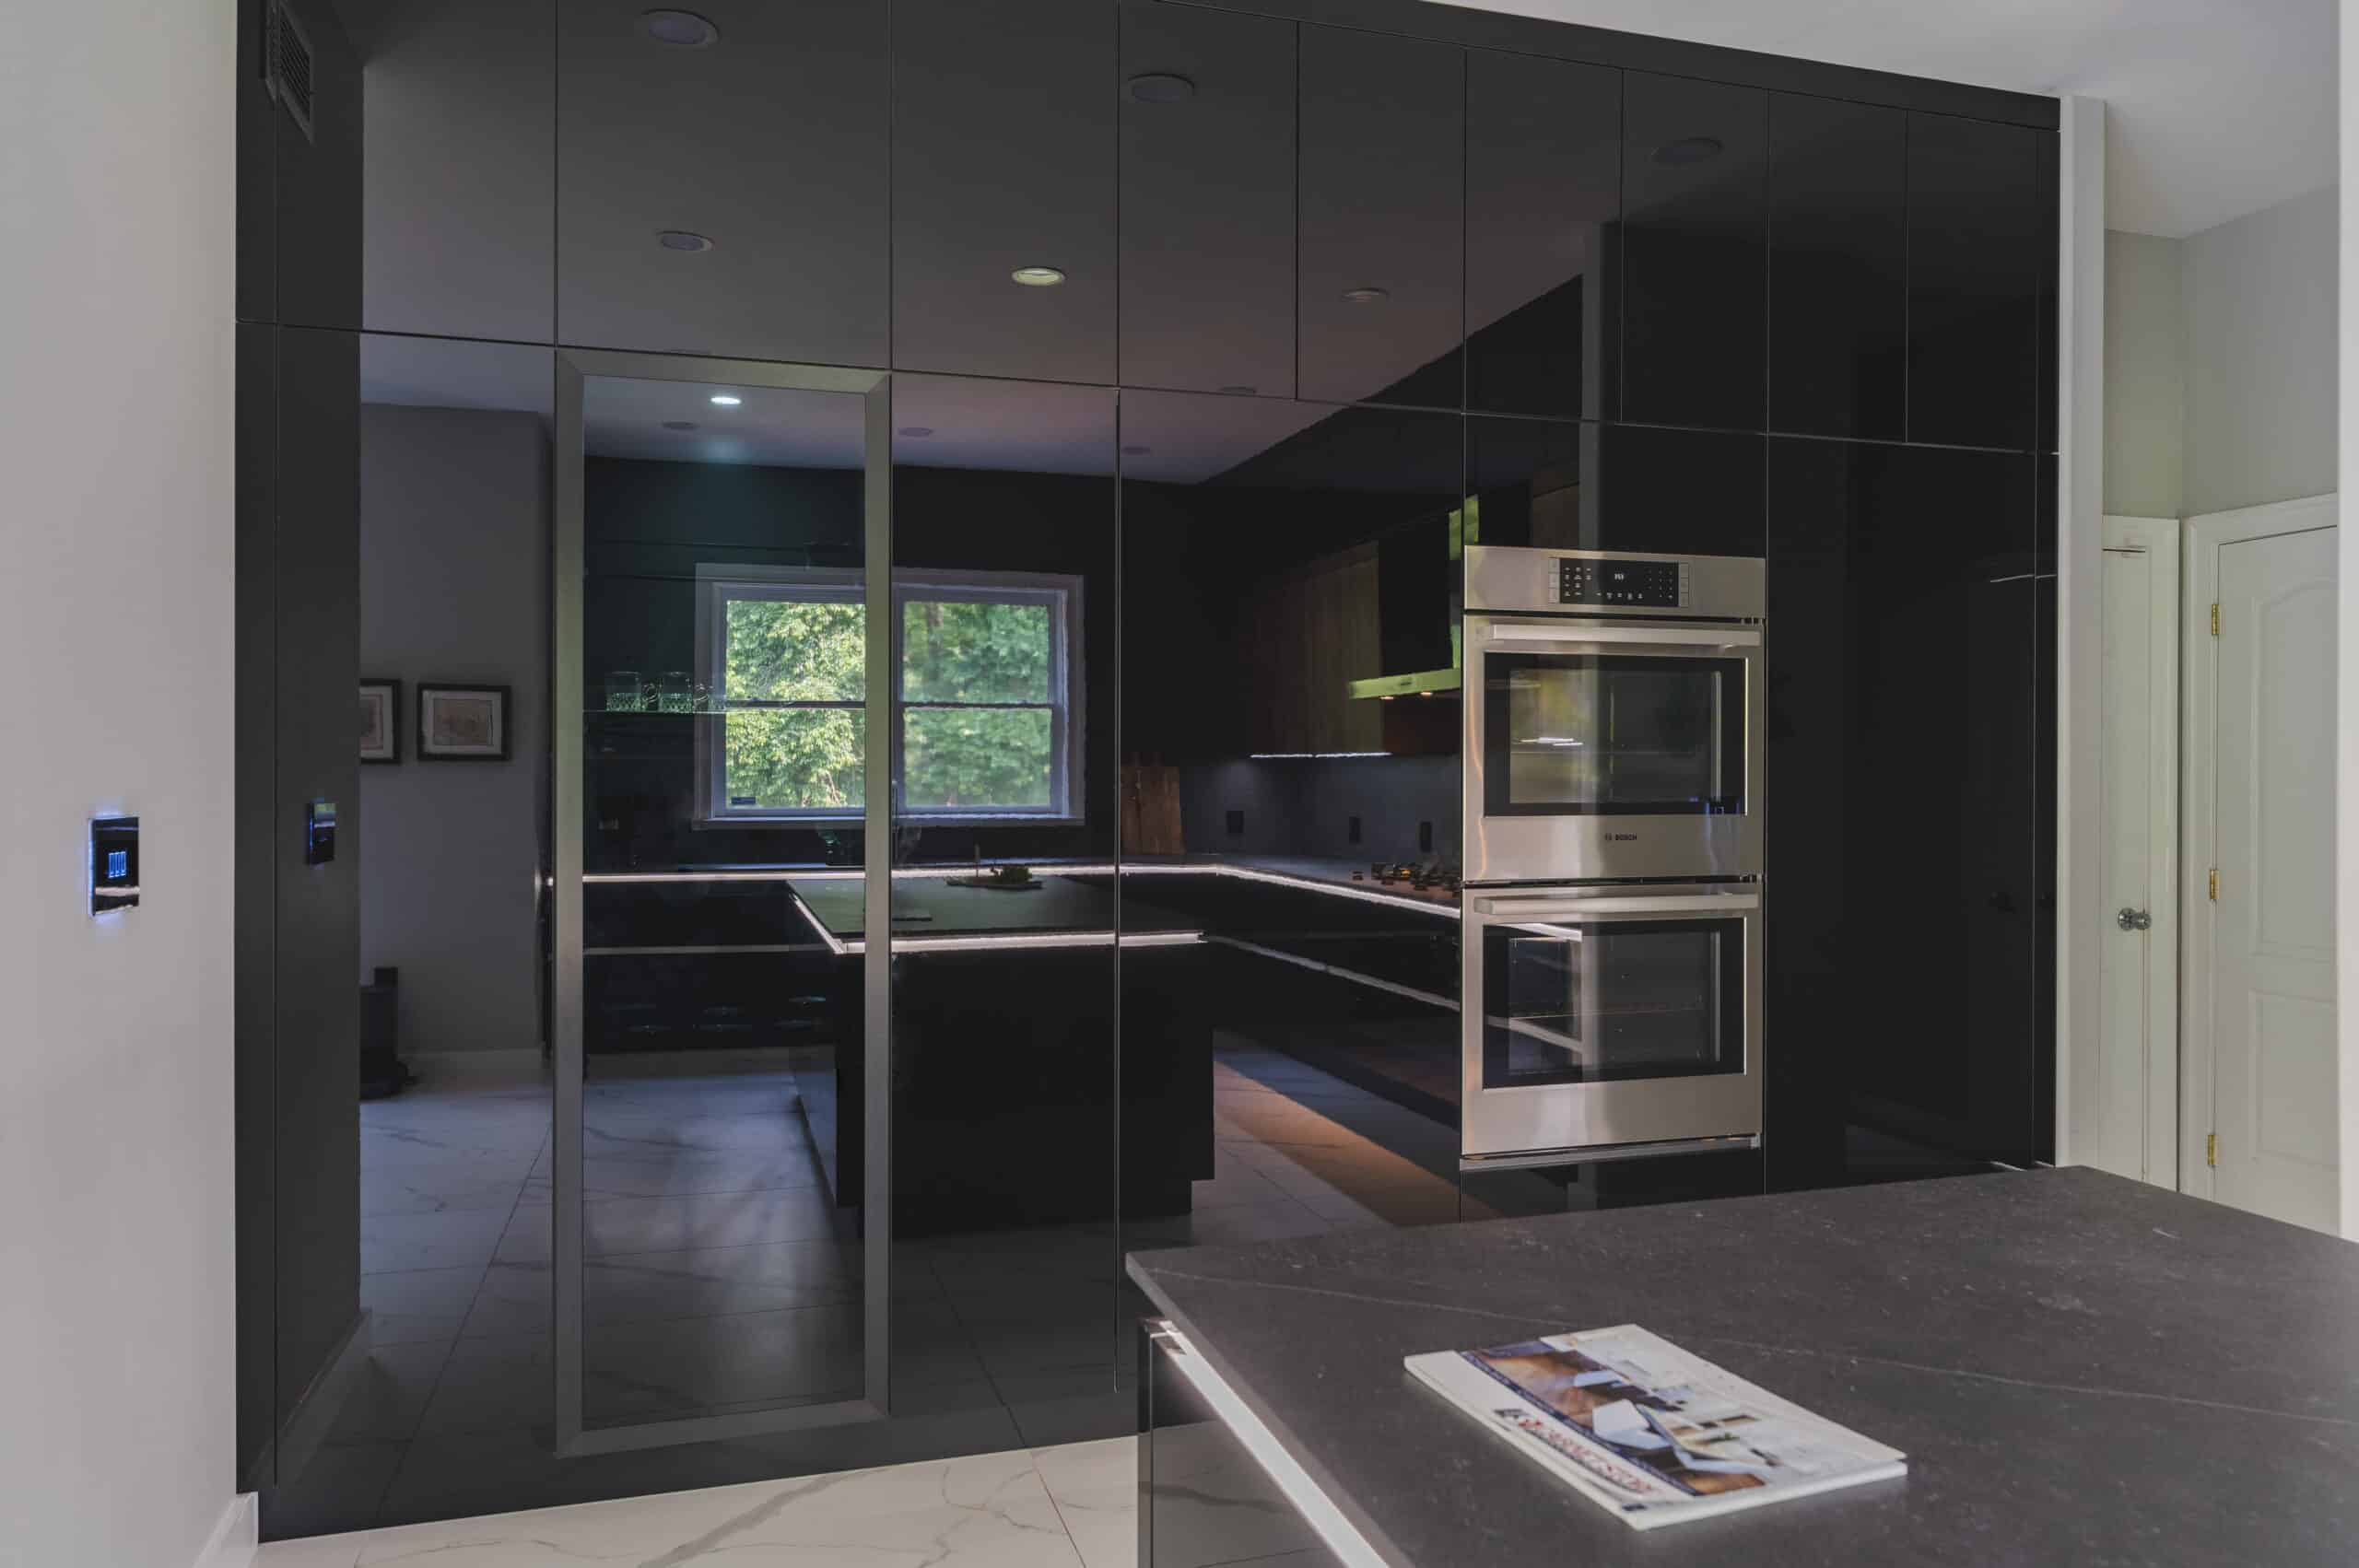 A contemporary kitchen featuring sleek black cabinets and black walls